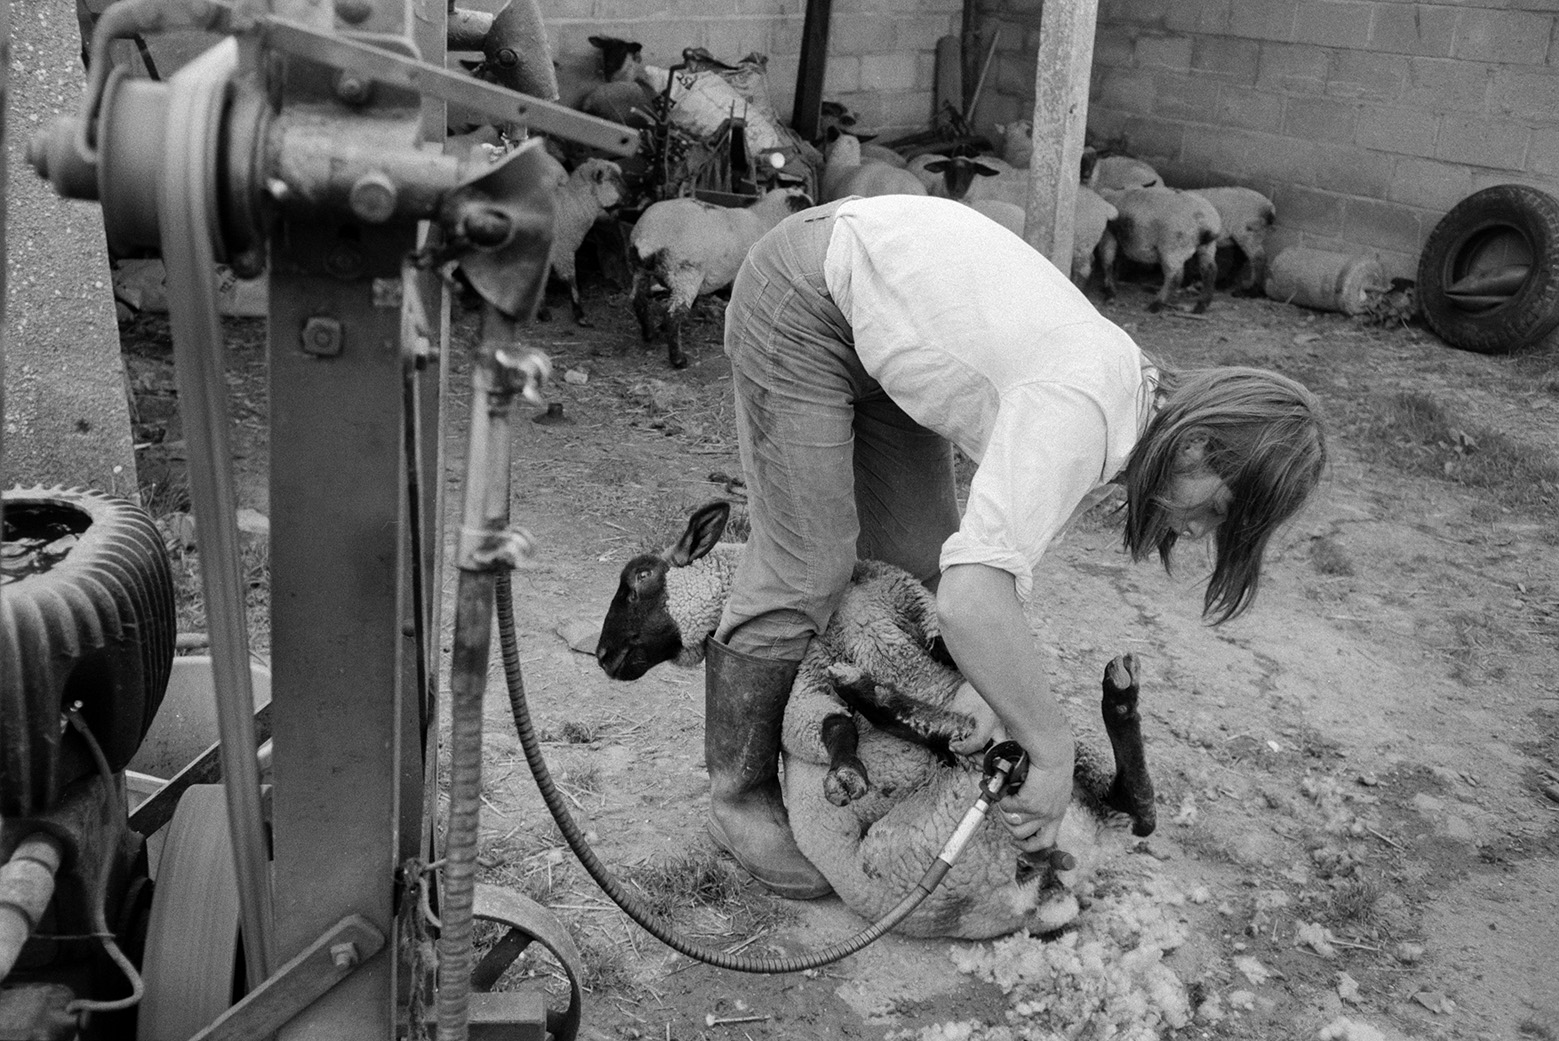 Derek Bright docking sheep by clearing grass and matted wool from their bottoms using a shearing machine, in the farmyard at Mill Road Farm, Beaford. Other sheep are waiting to be docked in the background. The farm was also known as Jeffrys.